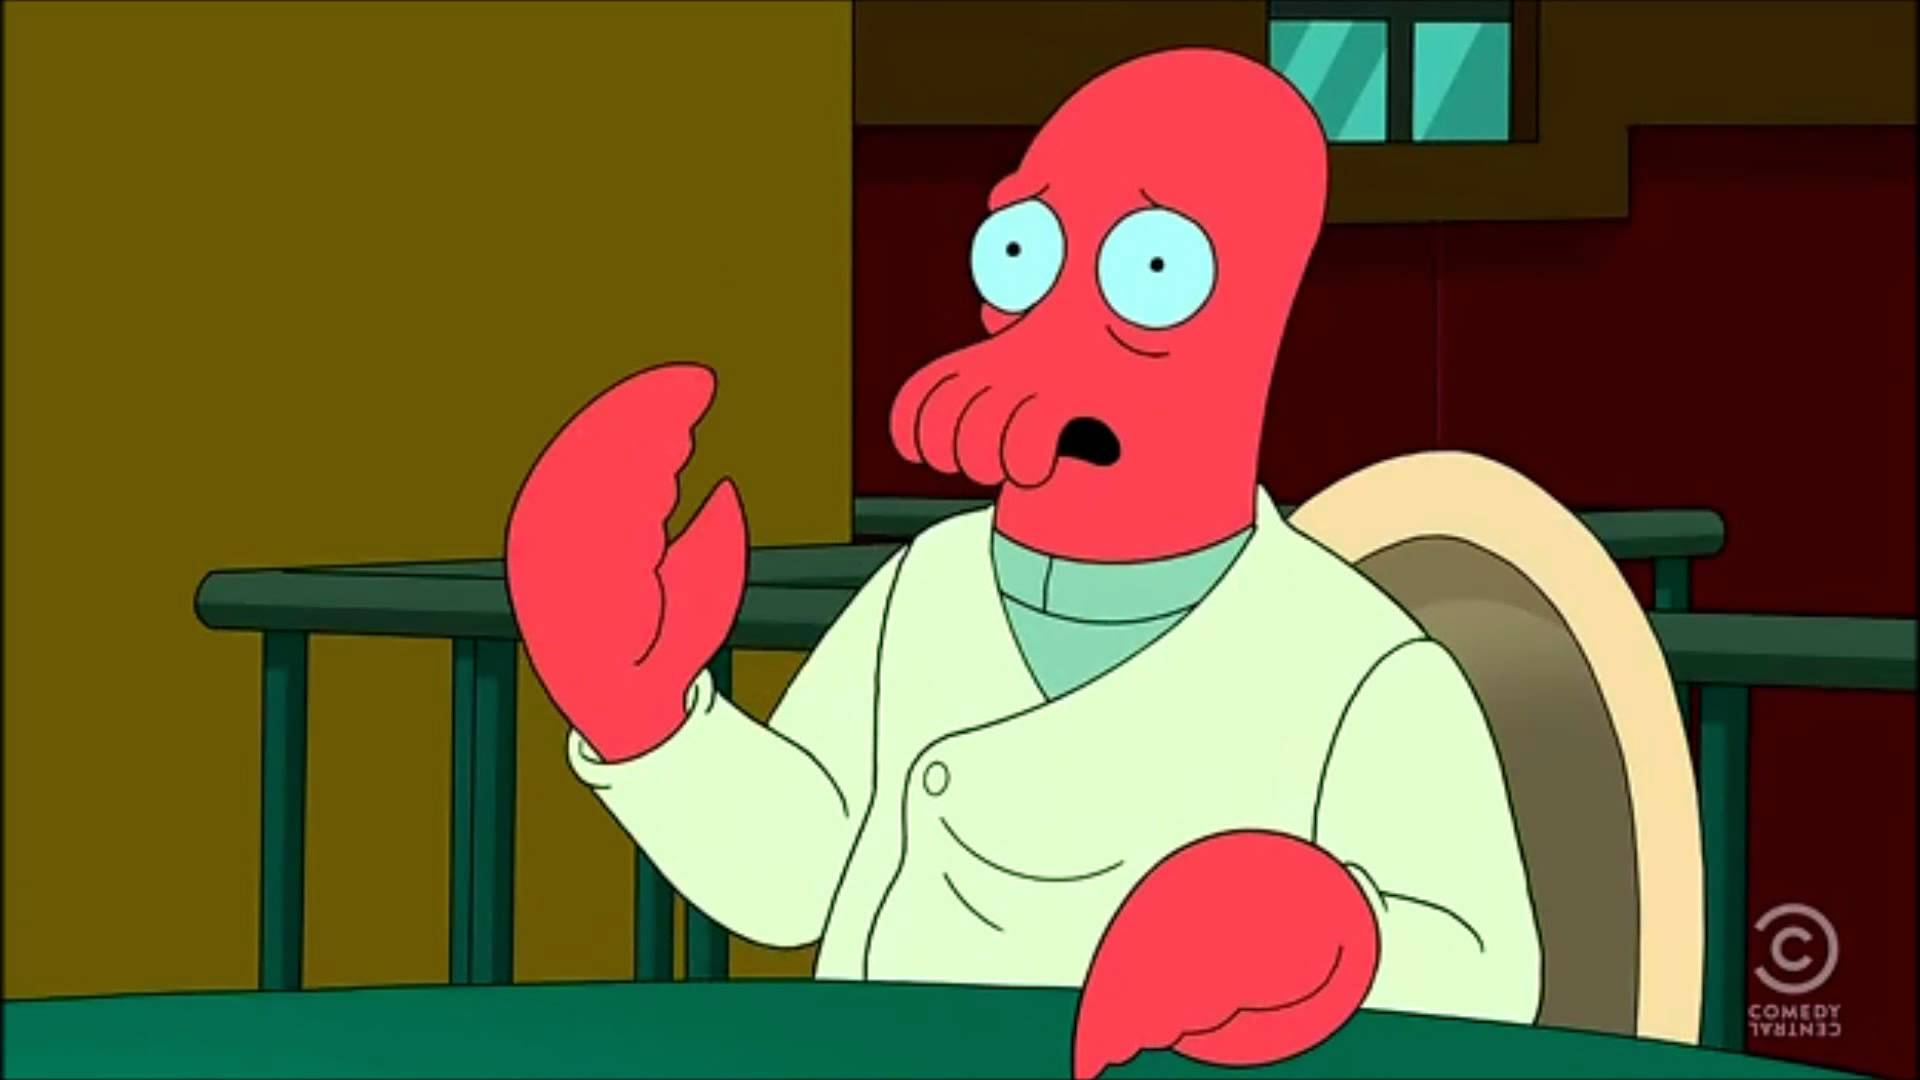 Zoidberg wallpapers, Humor, HQ Zoidberg pictures | 4K Wallpapers 2019